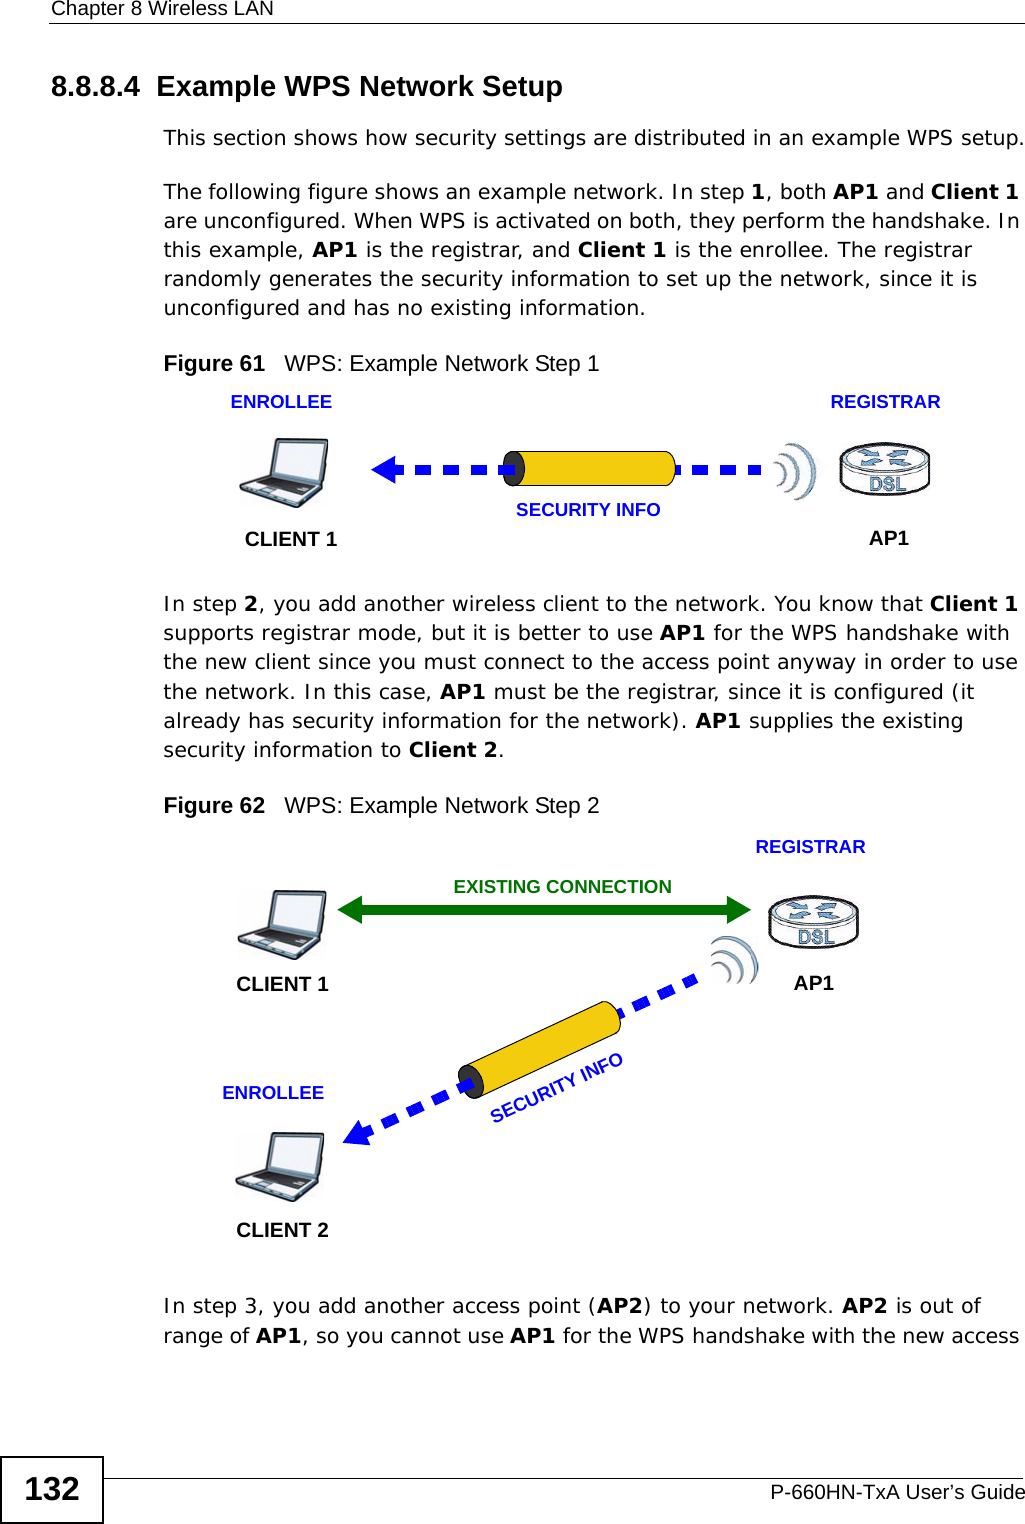 Chapter 8 Wireless LANP-660HN-TxA User’s Guide1328.8.8.4  Example WPS Network SetupThis section shows how security settings are distributed in an example WPS setup.The following figure shows an example network. In step 1, both AP1 and Client 1 are unconfigured. When WPS is activated on both, they perform the handshake. In this example, AP1 is the registrar, and Client 1 is the enrollee. The registrar randomly generates the security information to set up the network, since it is unconfigured and has no existing information.Figure 61   WPS: Example Network Step 1In step 2, you add another wireless client to the network. You know that Client 1 supports registrar mode, but it is better to use AP1 for the WPS handshake with the new client since you must connect to the access point anyway in order to use the network. In this case, AP1 must be the registrar, since it is configured (it already has security information for the network). AP1 supplies the existing security information to Client 2.Figure 62   WPS: Example Network Step 2In step 3, you add another access point (AP2) to your network. AP2 is out of range of AP1, so you cannot use AP1 for the WPS handshake with the new access REGISTRARENROLLEESECURITY INFOCLIENT 1 AP1REGISTRARCLIENT 1 AP1ENROLLEECLIENT 2EXISTING CONNECTIONSECURITY INFO